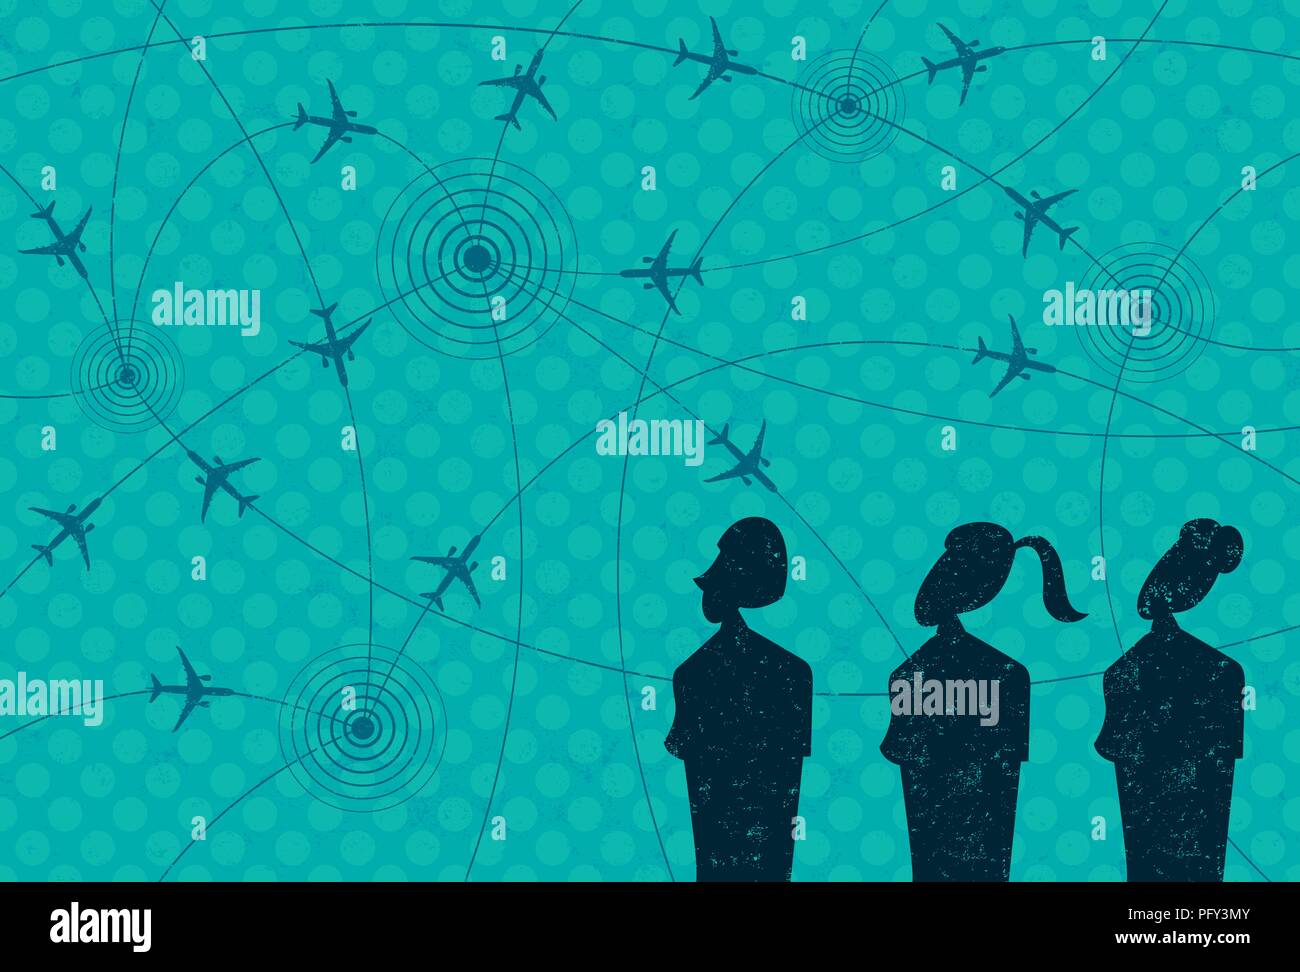 Business Travel. Businesswomen looking at airplane icons in flight paths from city to city. Stock Vector